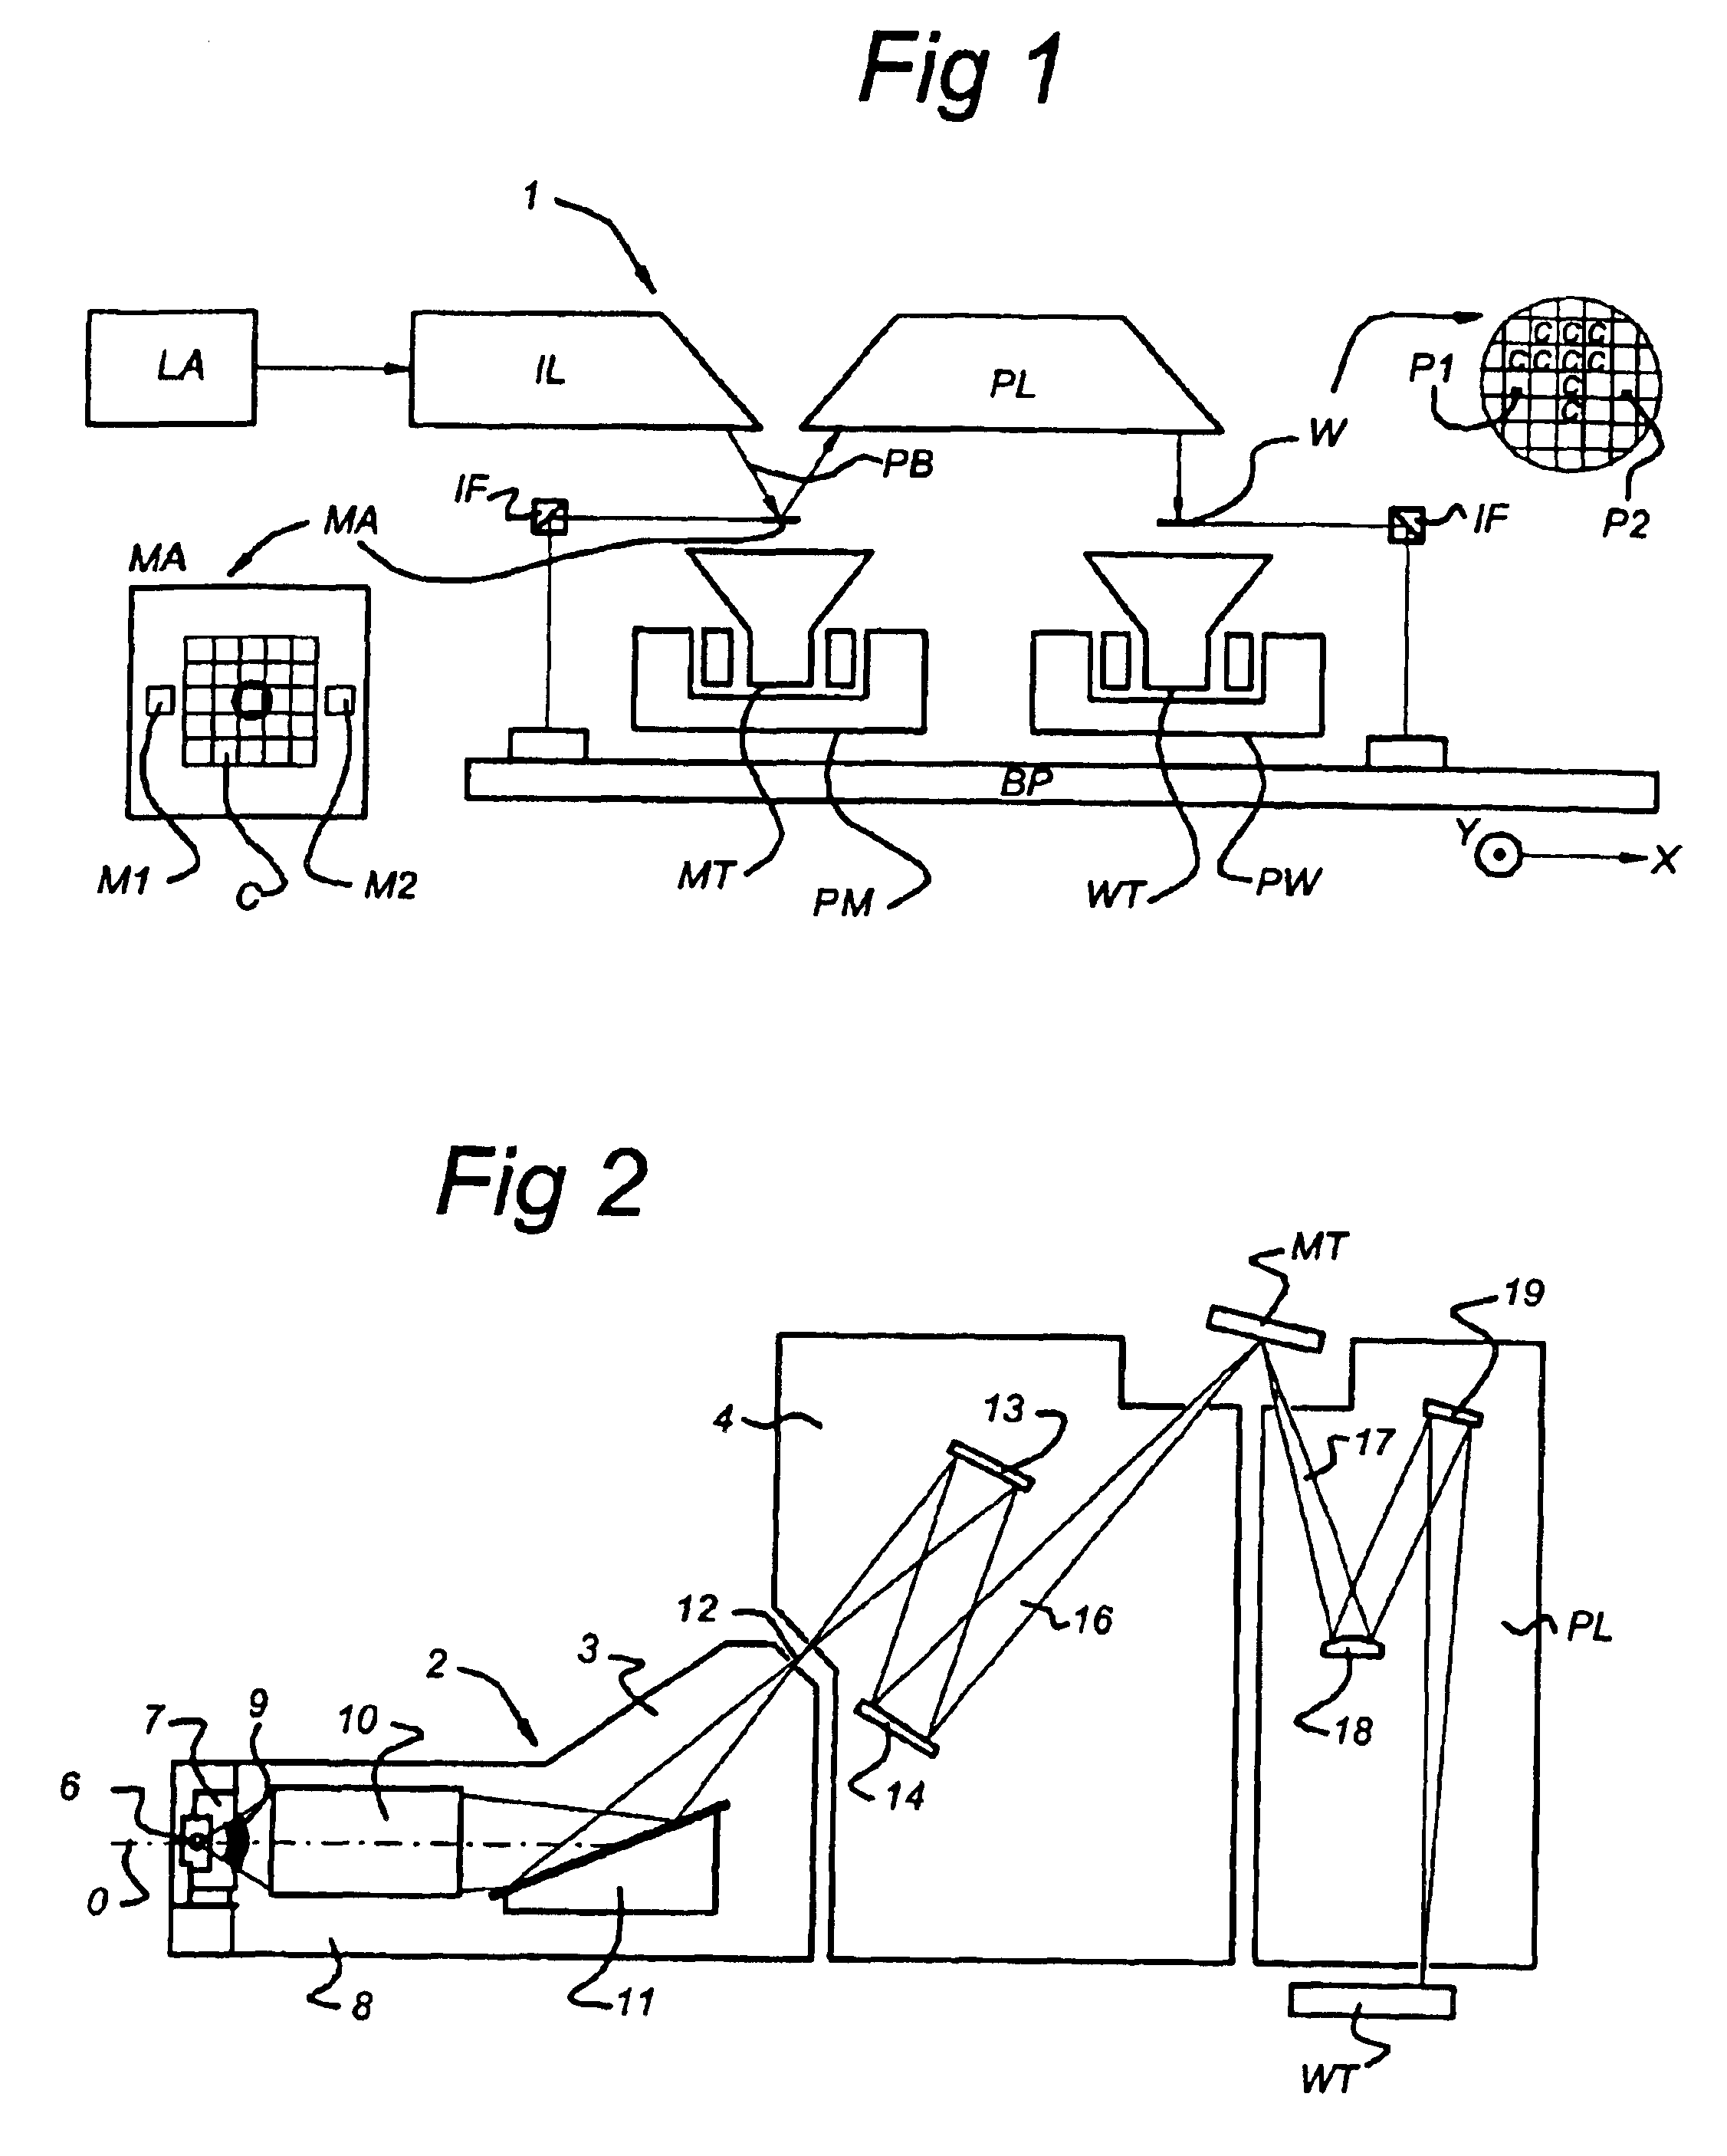 Lithographic projection apparatus with multiple suppression meshes